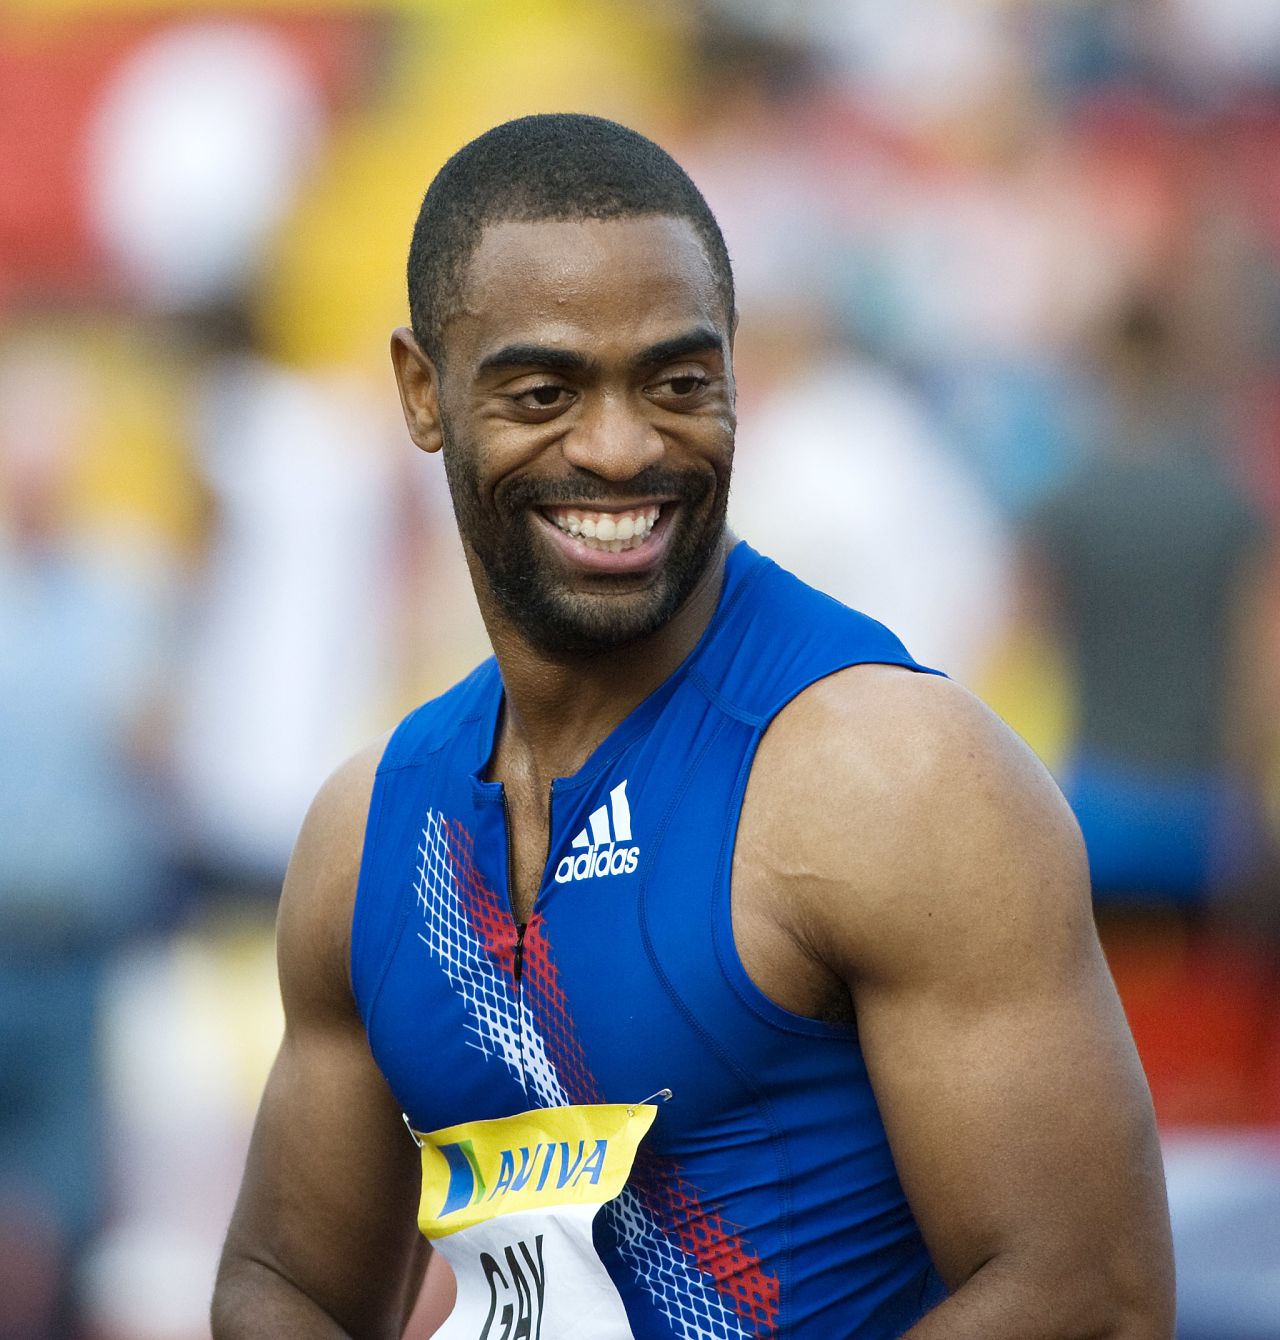 American sprinter Tyson Gay says he's in his prime and fit and ready for the London Olympics.